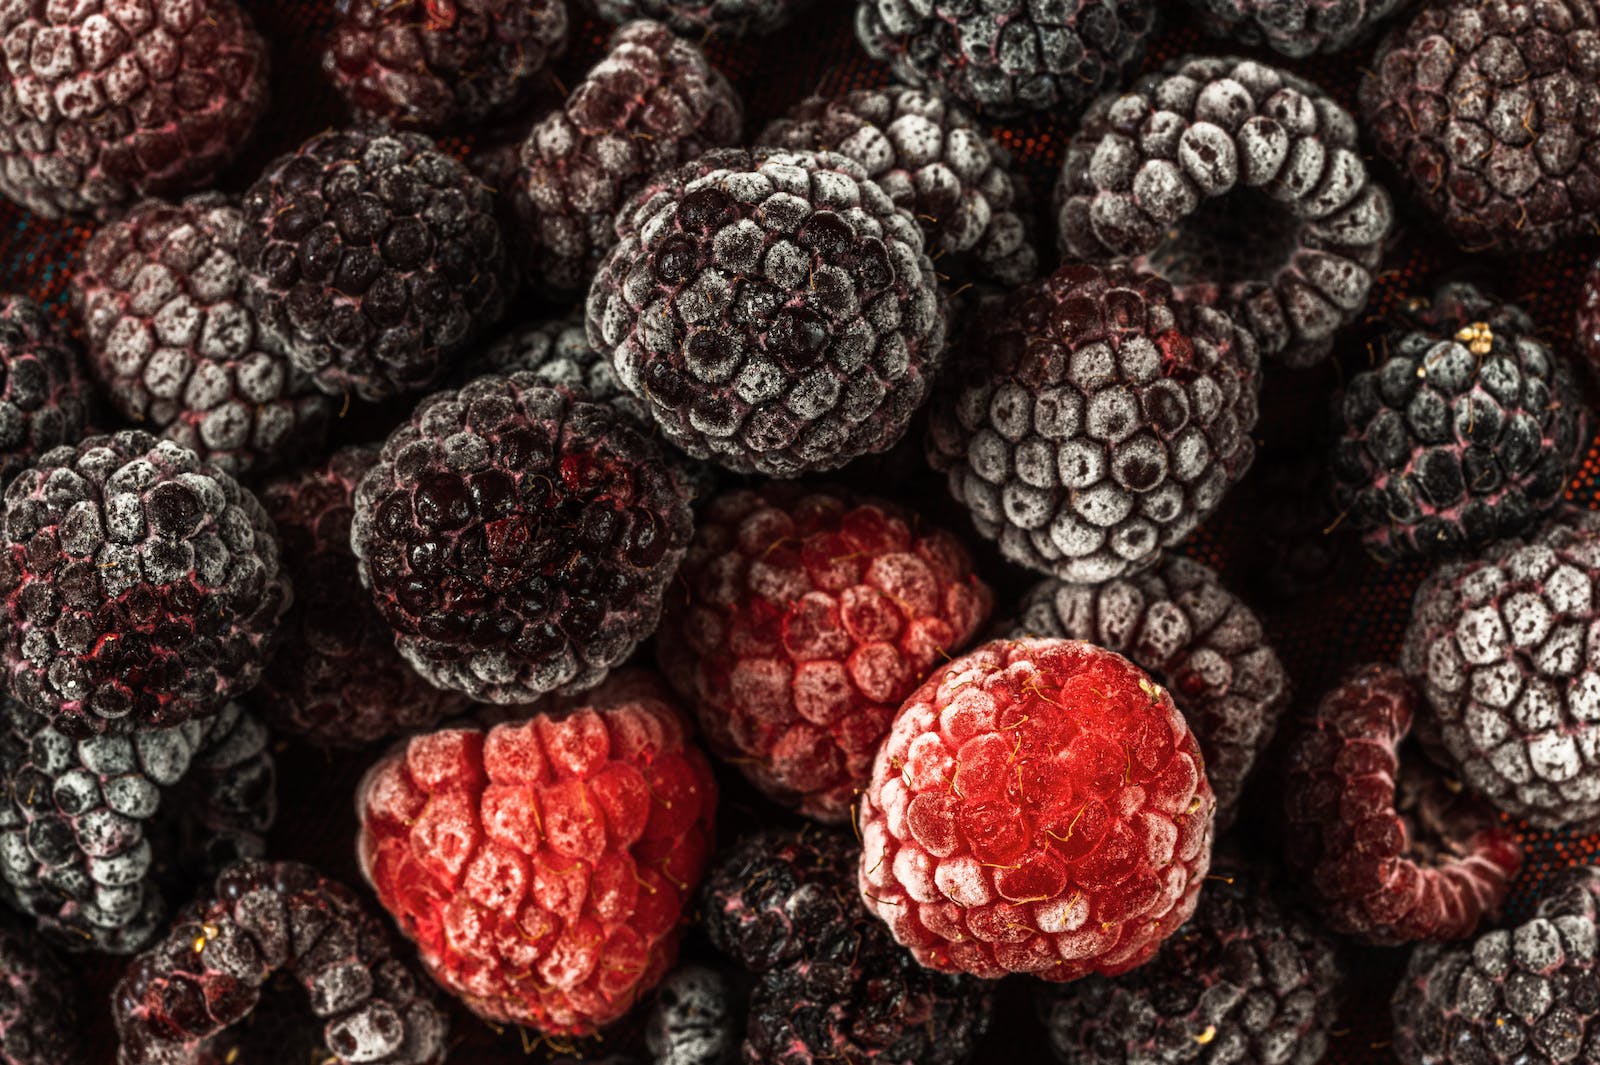 Frozen Raspberries in Close-up Photography